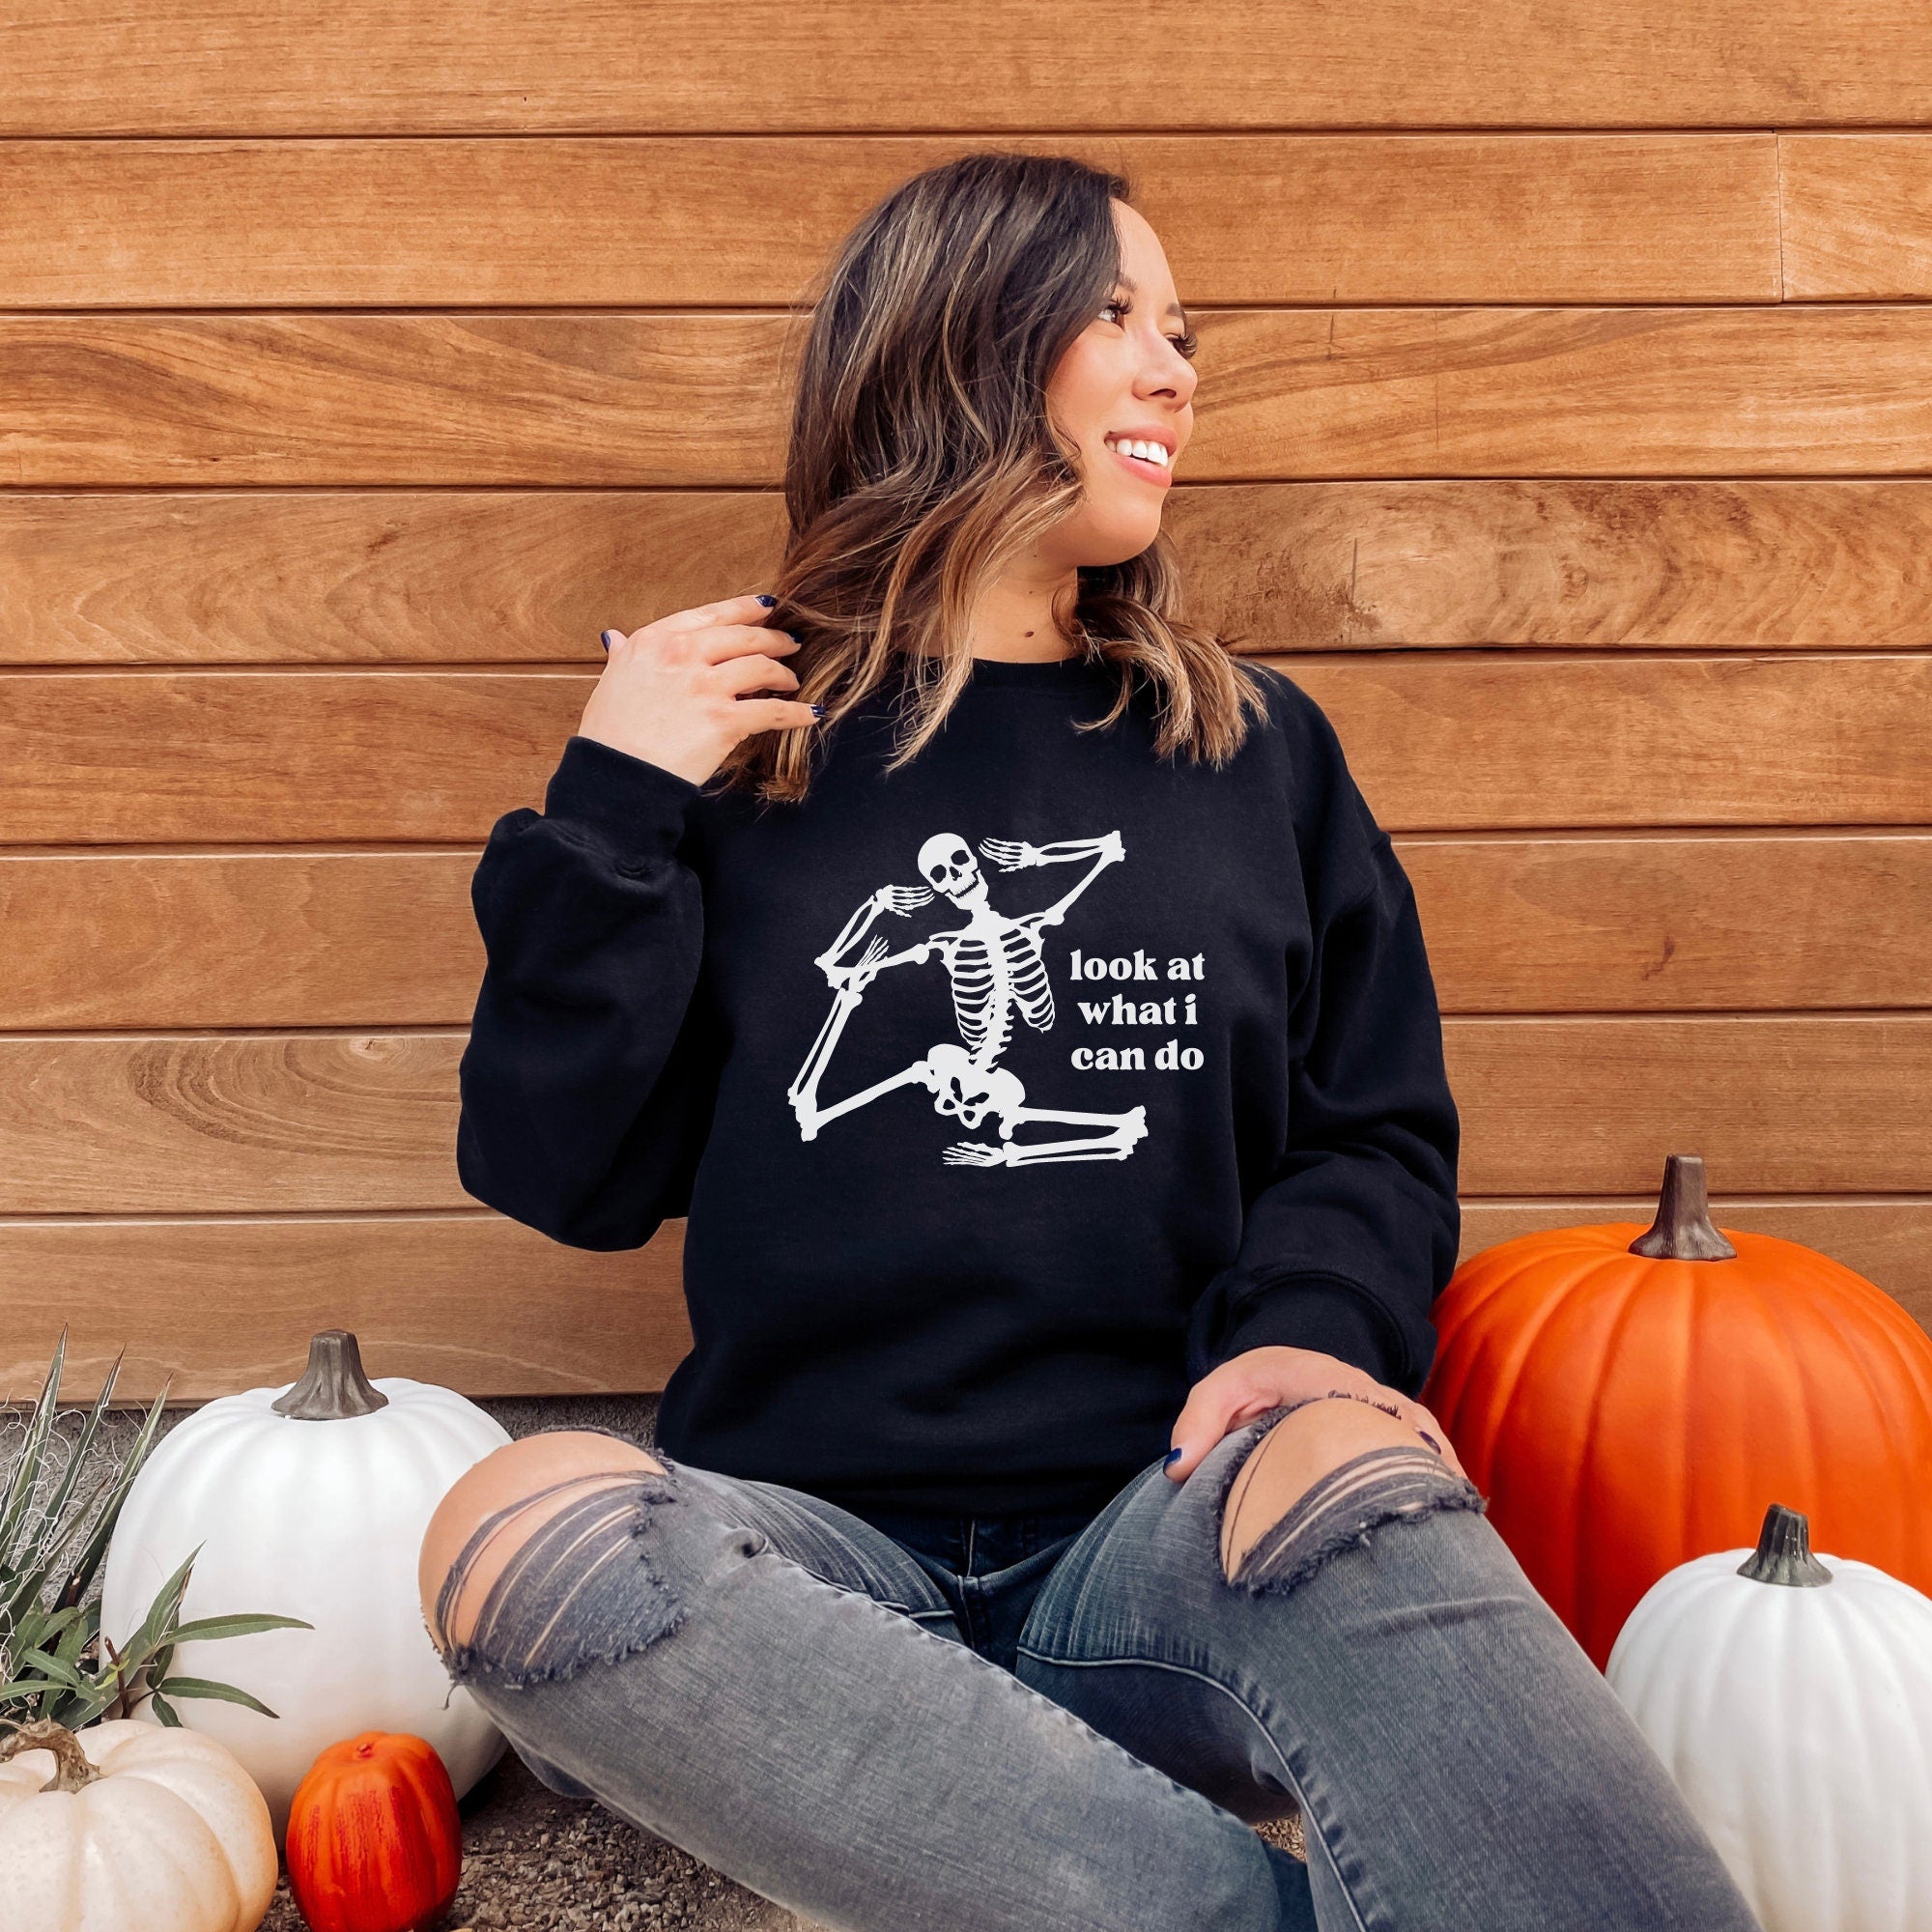 Look At What I Can Do Shirt | Skeleton Sweatshirt for Women | Skeleton Sweatshirt for Men | Funny Costume for Halloween Party